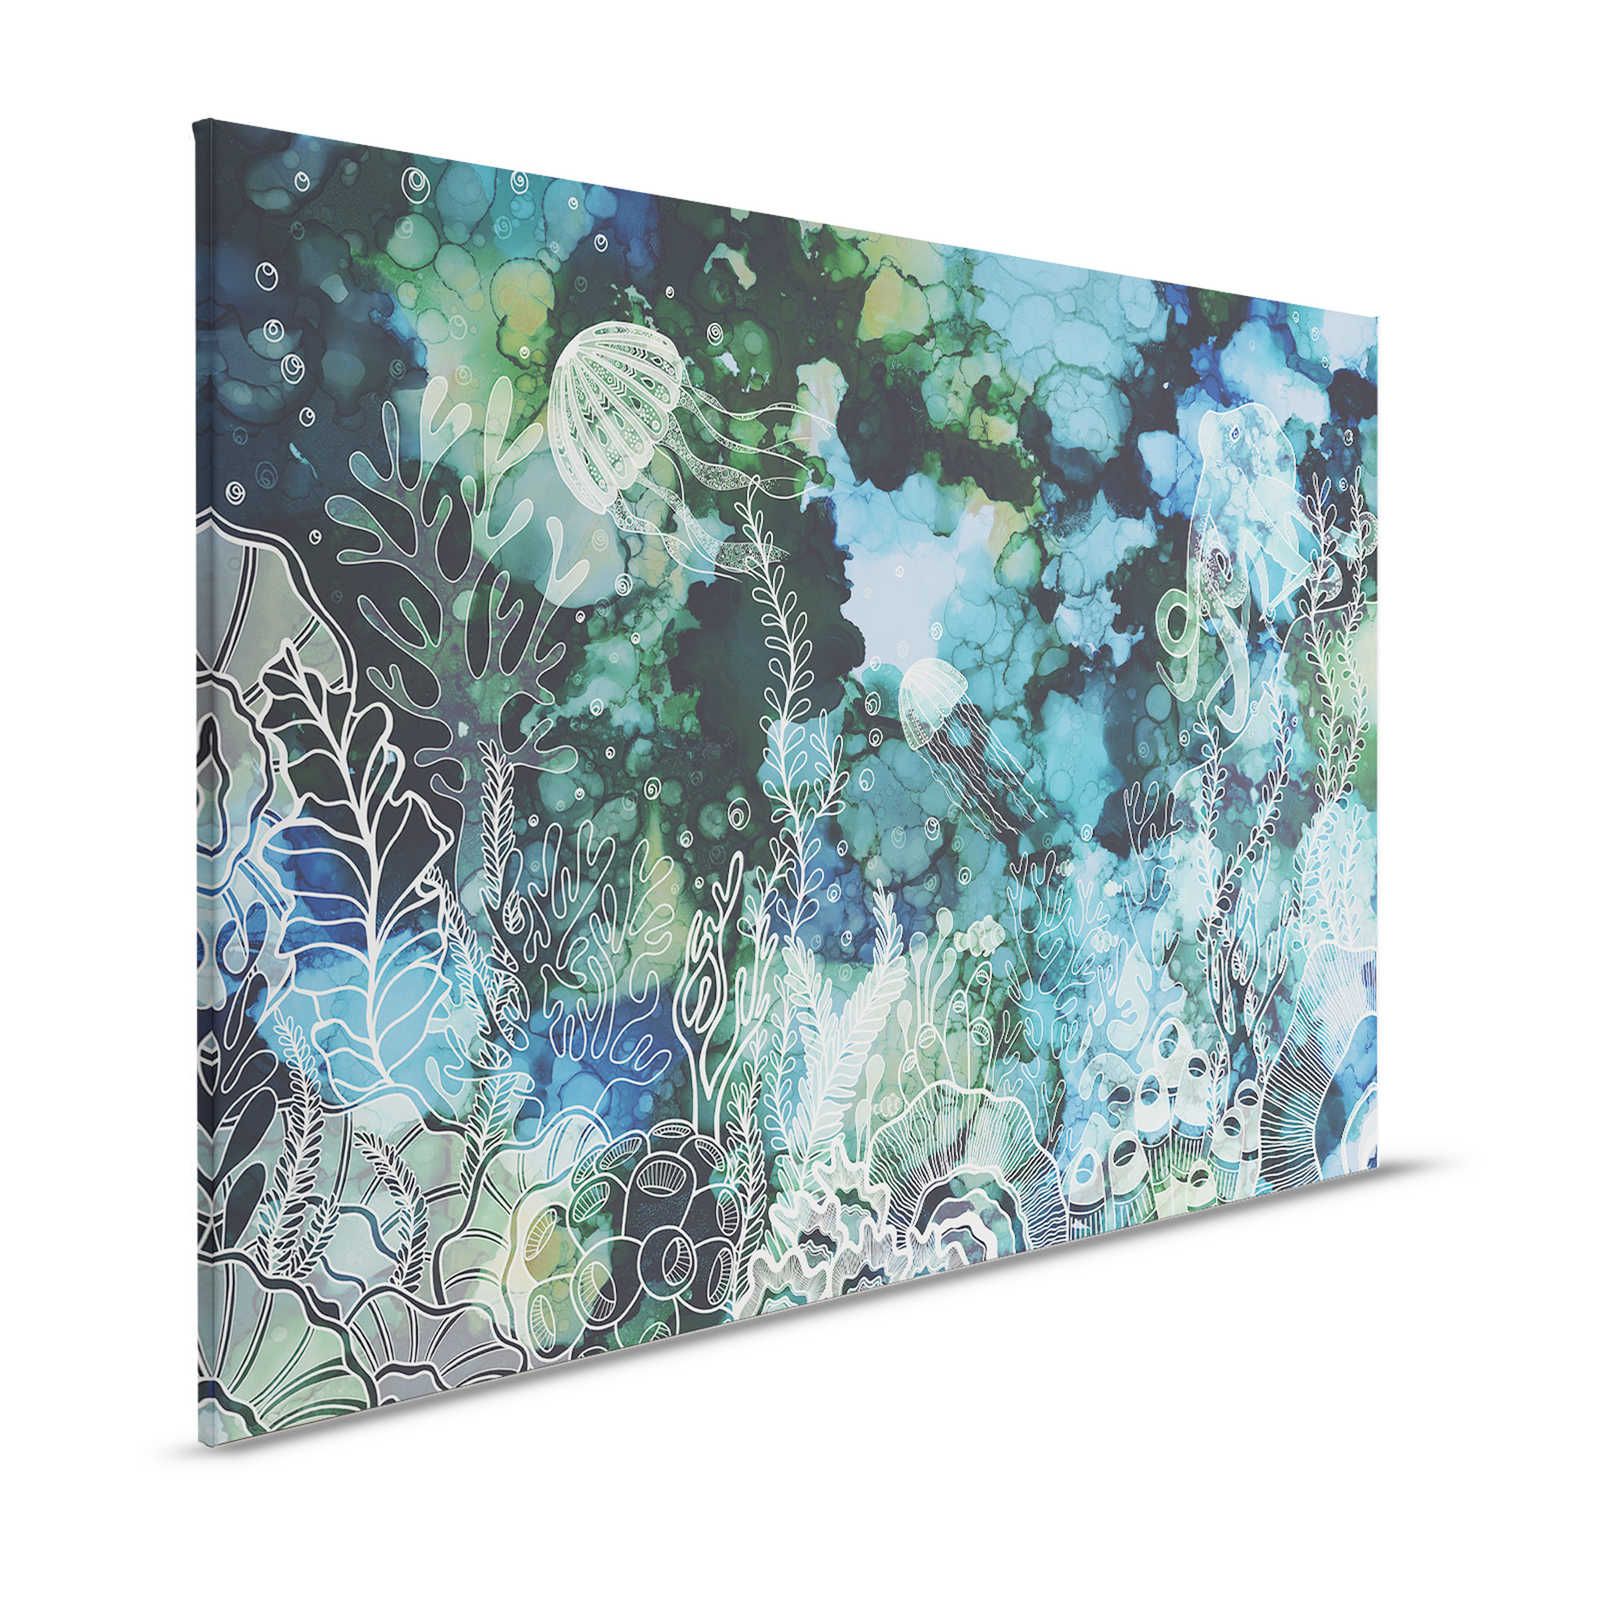 Canvas painting with underwater coral reef in acrylic colours - 1,20 m x 0,80 m
